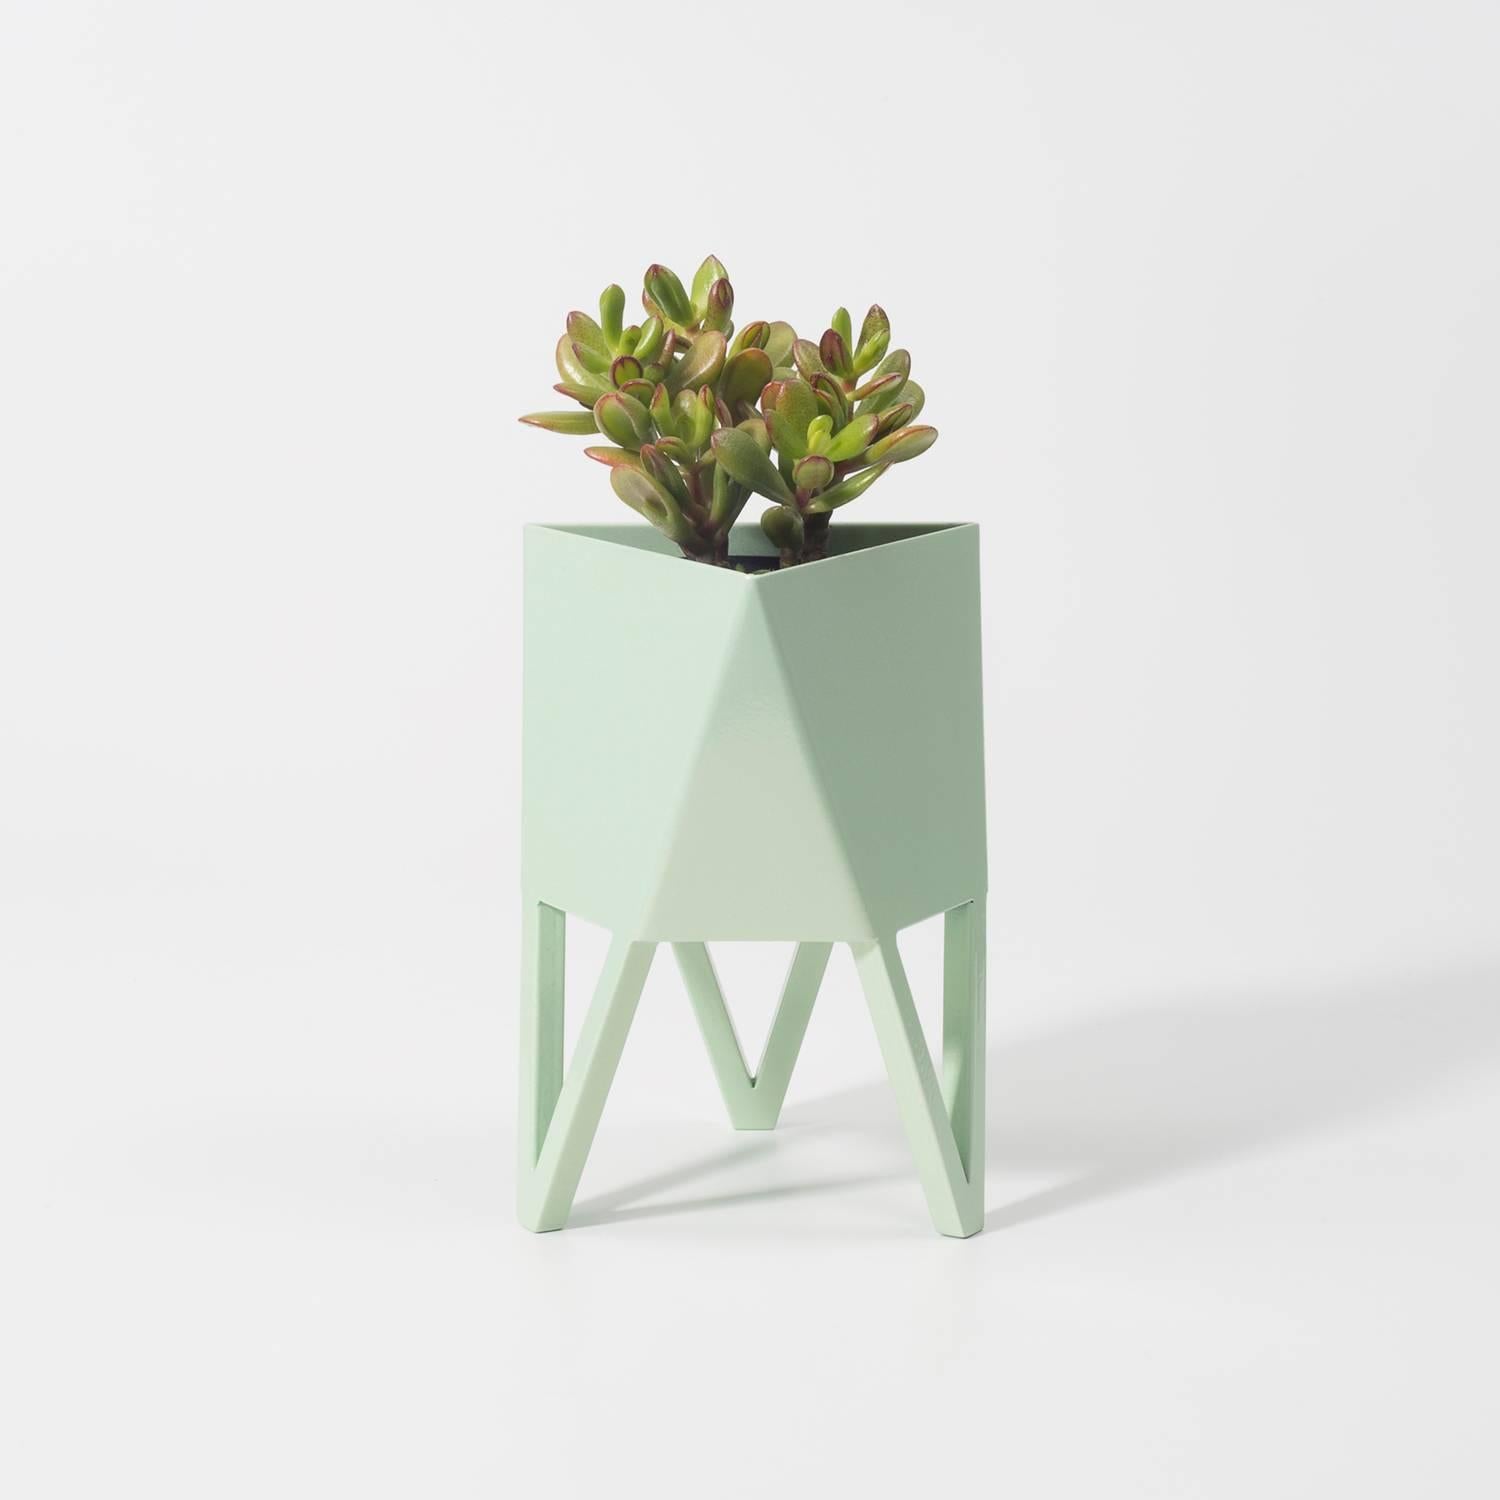 Force/Collide's award-winning signature planter is an ongoing production with multiple colors and sizes. A unique geometric pattern that's triangular at the top and hexagonal at the base is central to the design, both aesthetically and functionally.